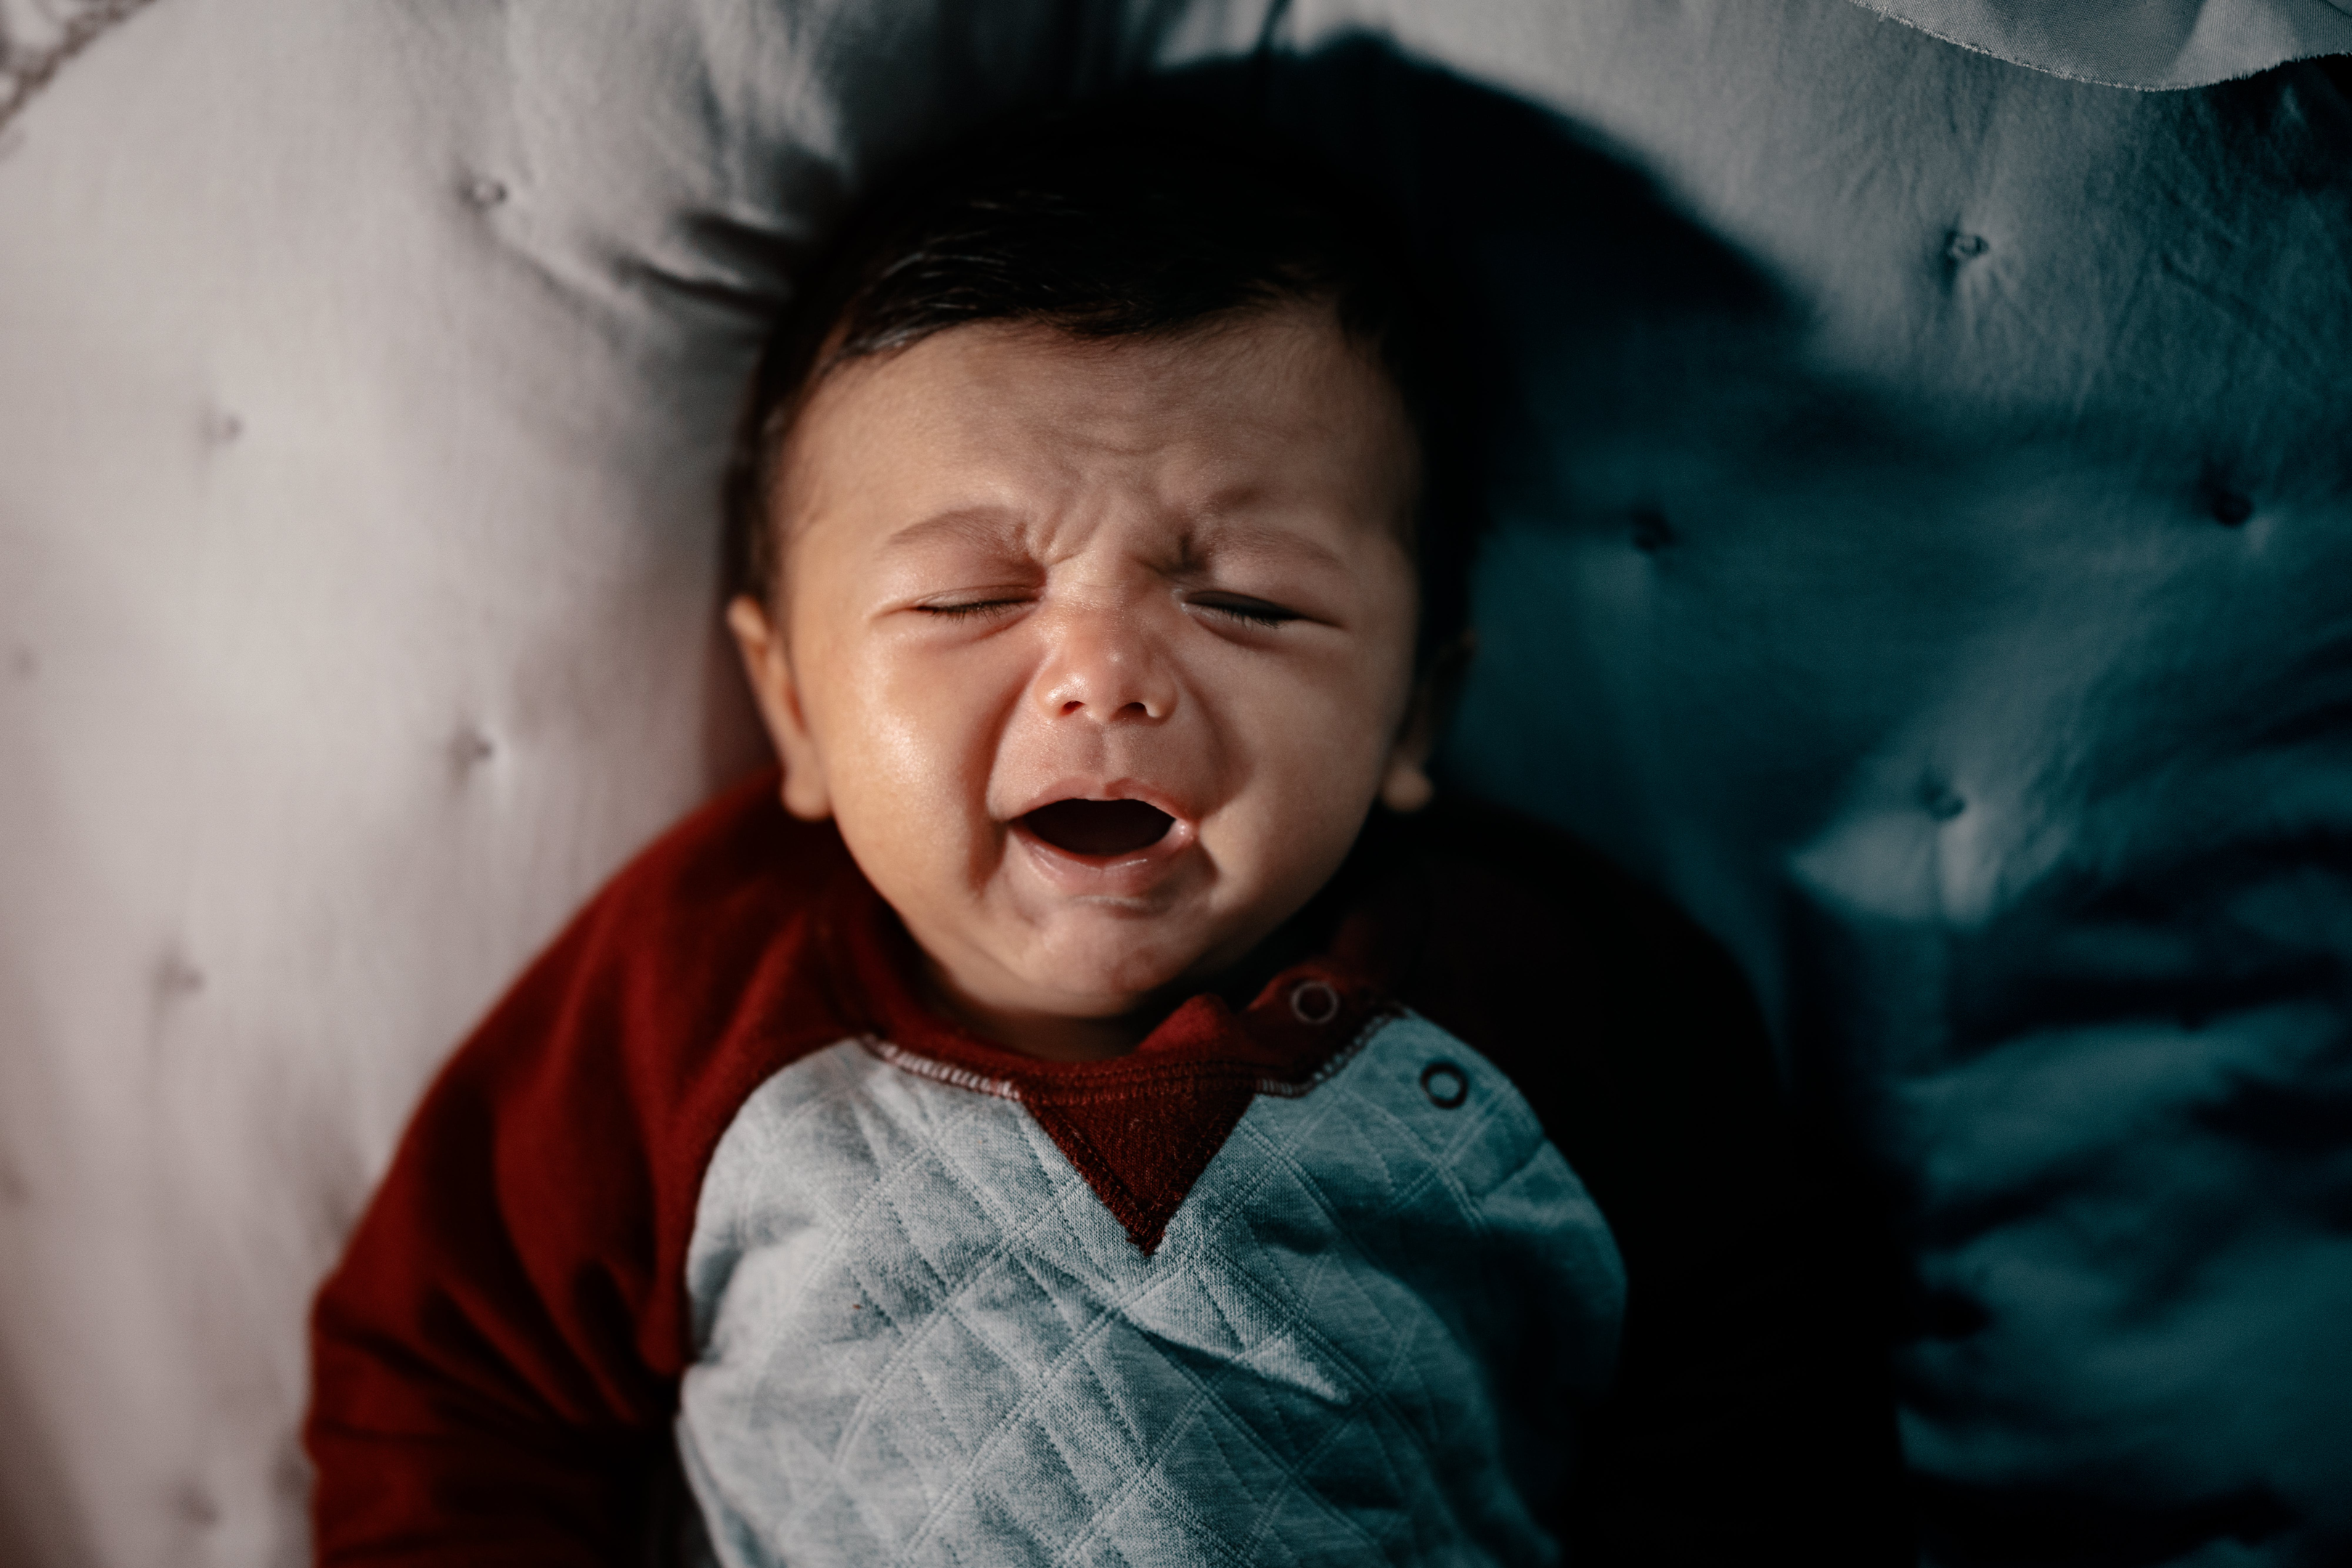 Photo by Gursher  Gill: https://www.pexels.com/photo/a-baby-crying-while-lying-on-the-bed-13156140/